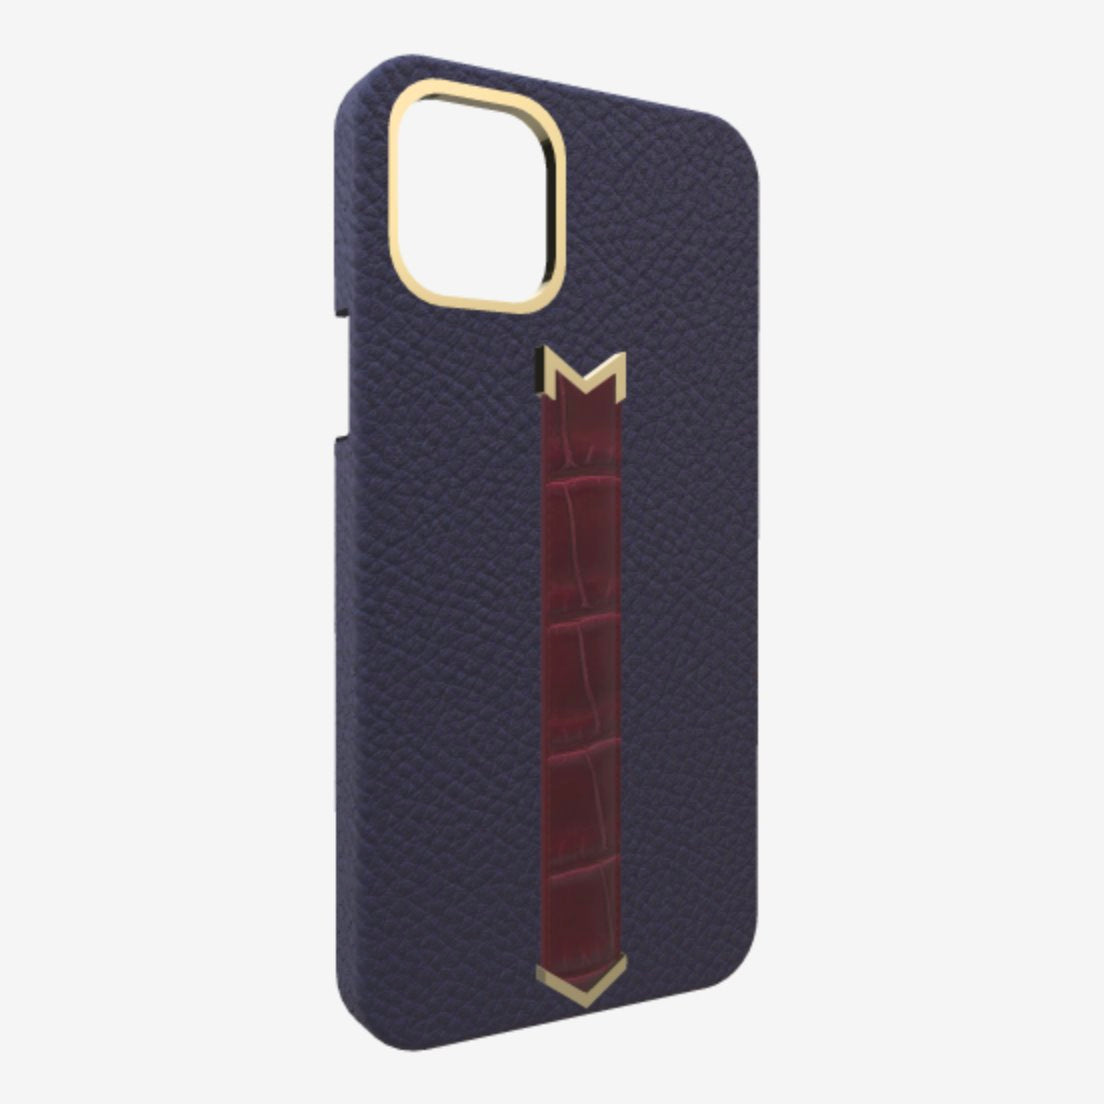 Gold Finger Strap Case for iPhone 13 Pro Max in Genuine Calfskin and Alligator Navy Blue Burgundy Palace 